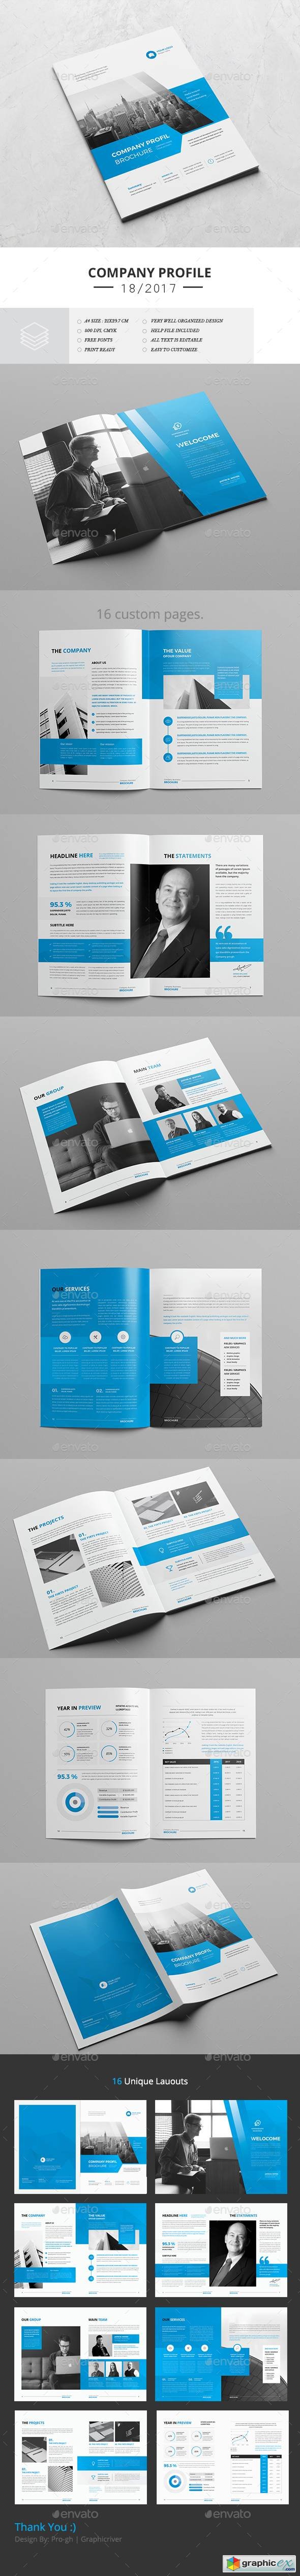 Corporate Brochure 16 Pages